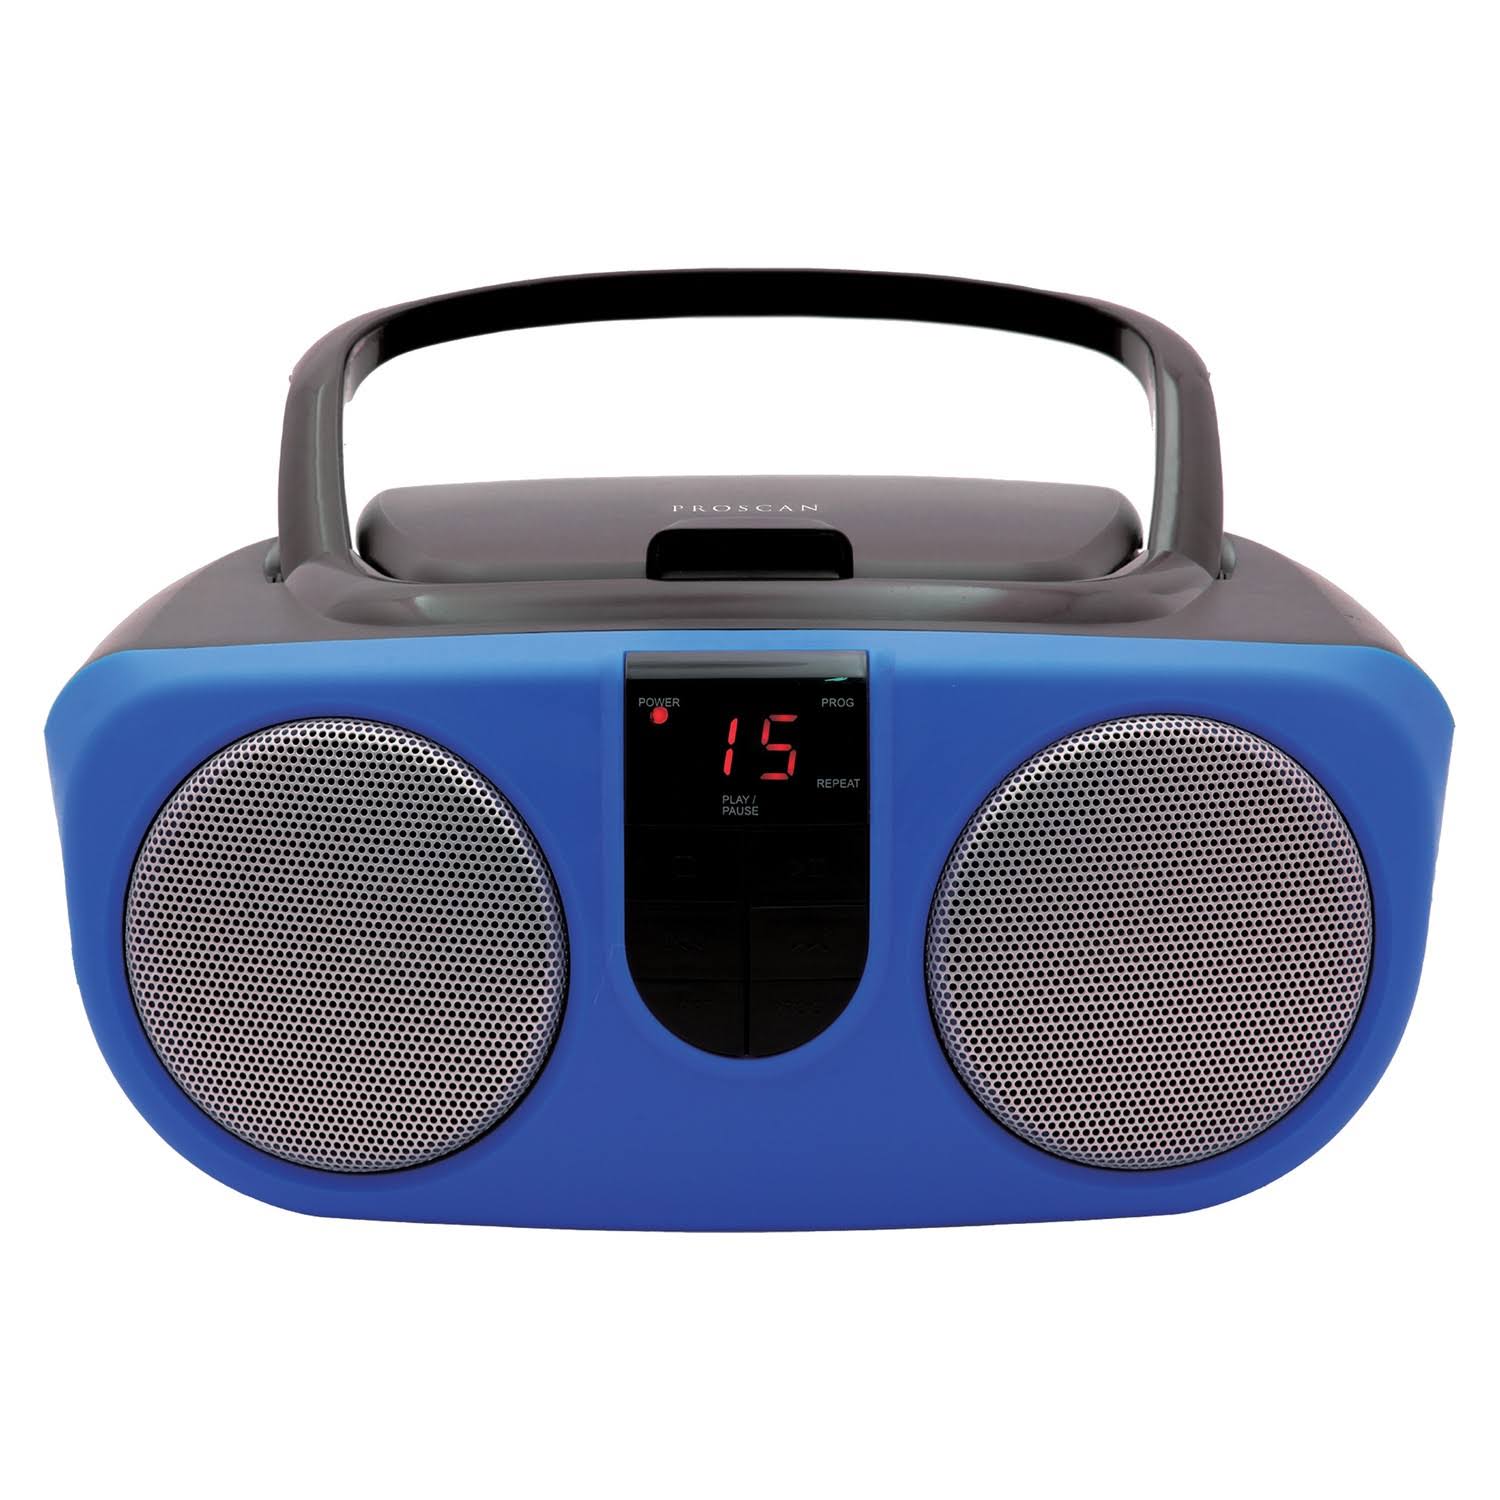 Proscan Portable Cd Player/Boombox With Am/Fm Radio Blue